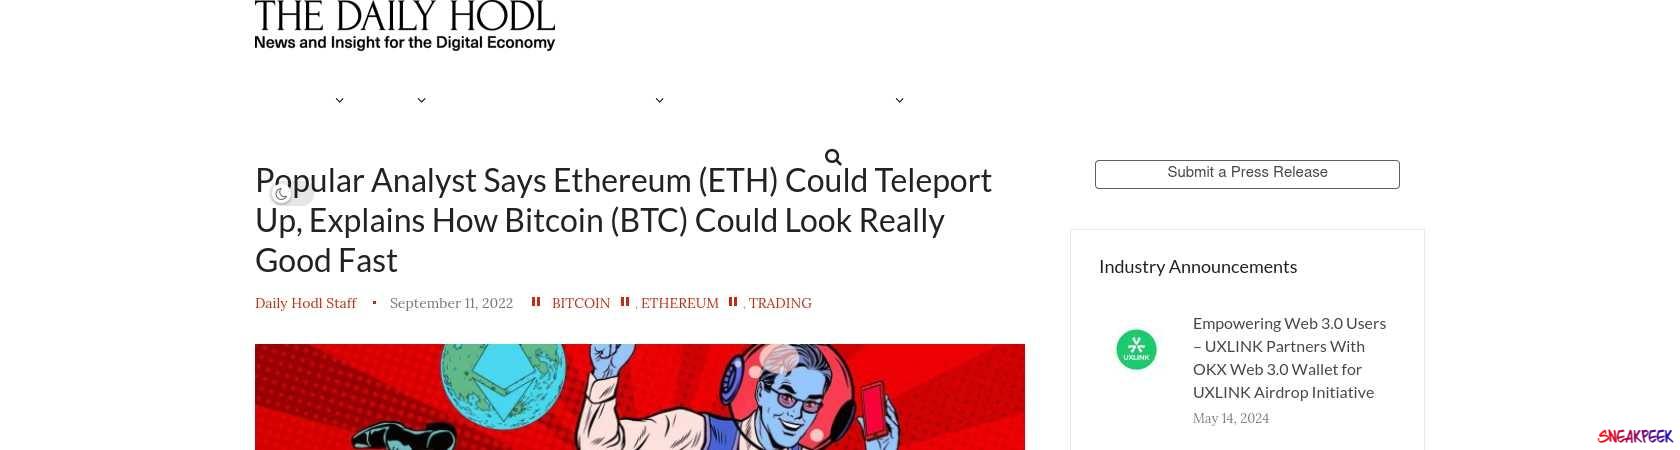 Read the full Article:  ⭲ Popular Analyst Says Ethereum (ETH) Could Teleport Up, Explains How Bitcoin (BTC) Could Look Really Good Fast